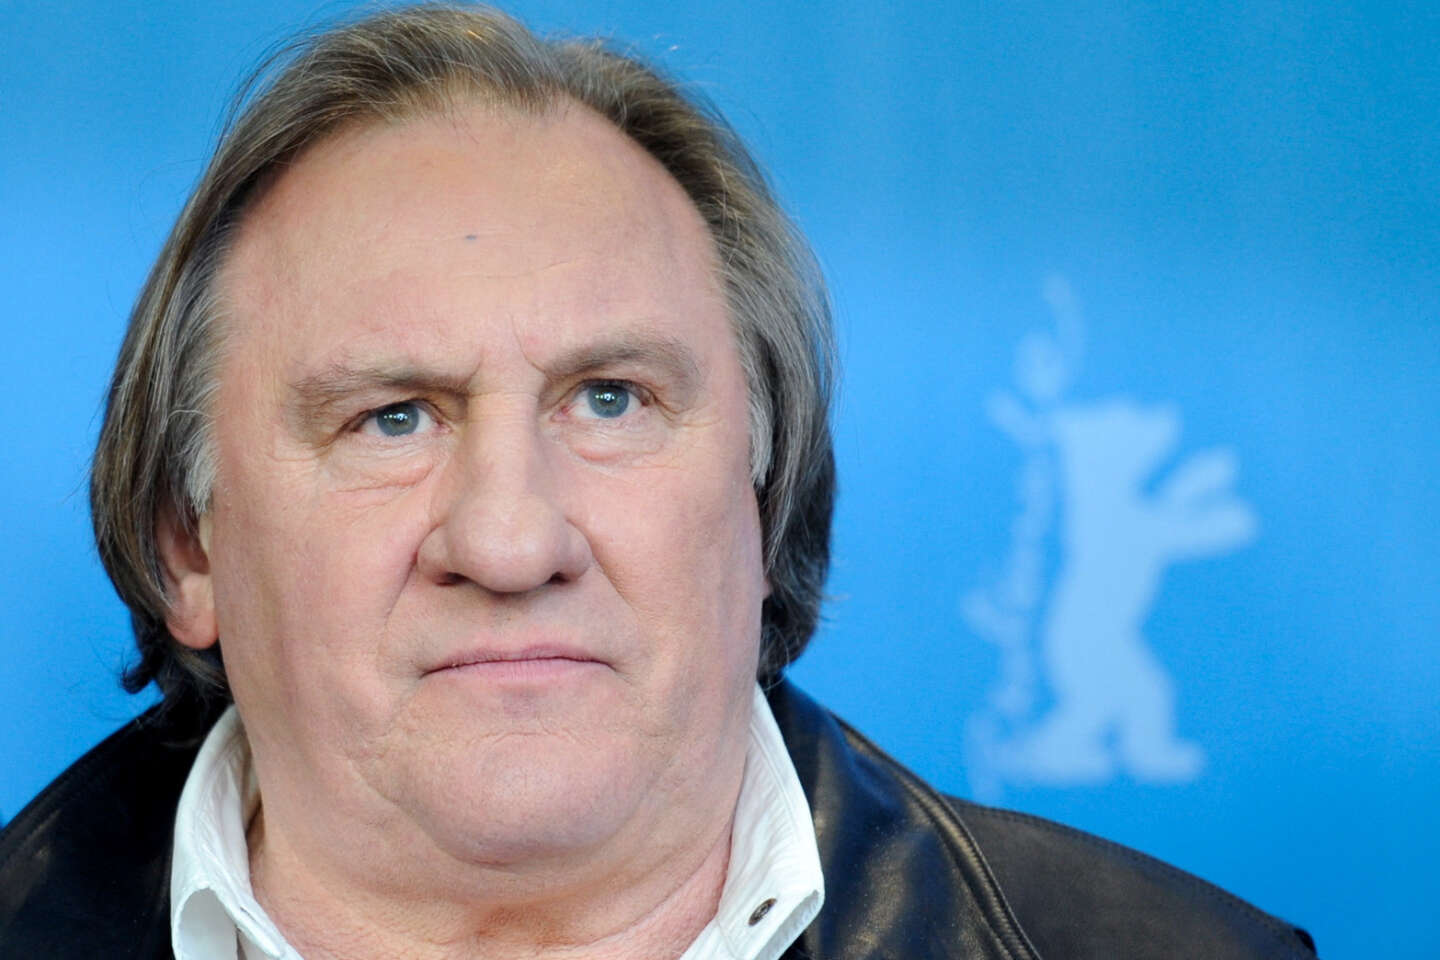 Gérard Depardieu: a “counter-tribune” signed by six hundred artists to break “the law of silence” and “the echo of impunity”